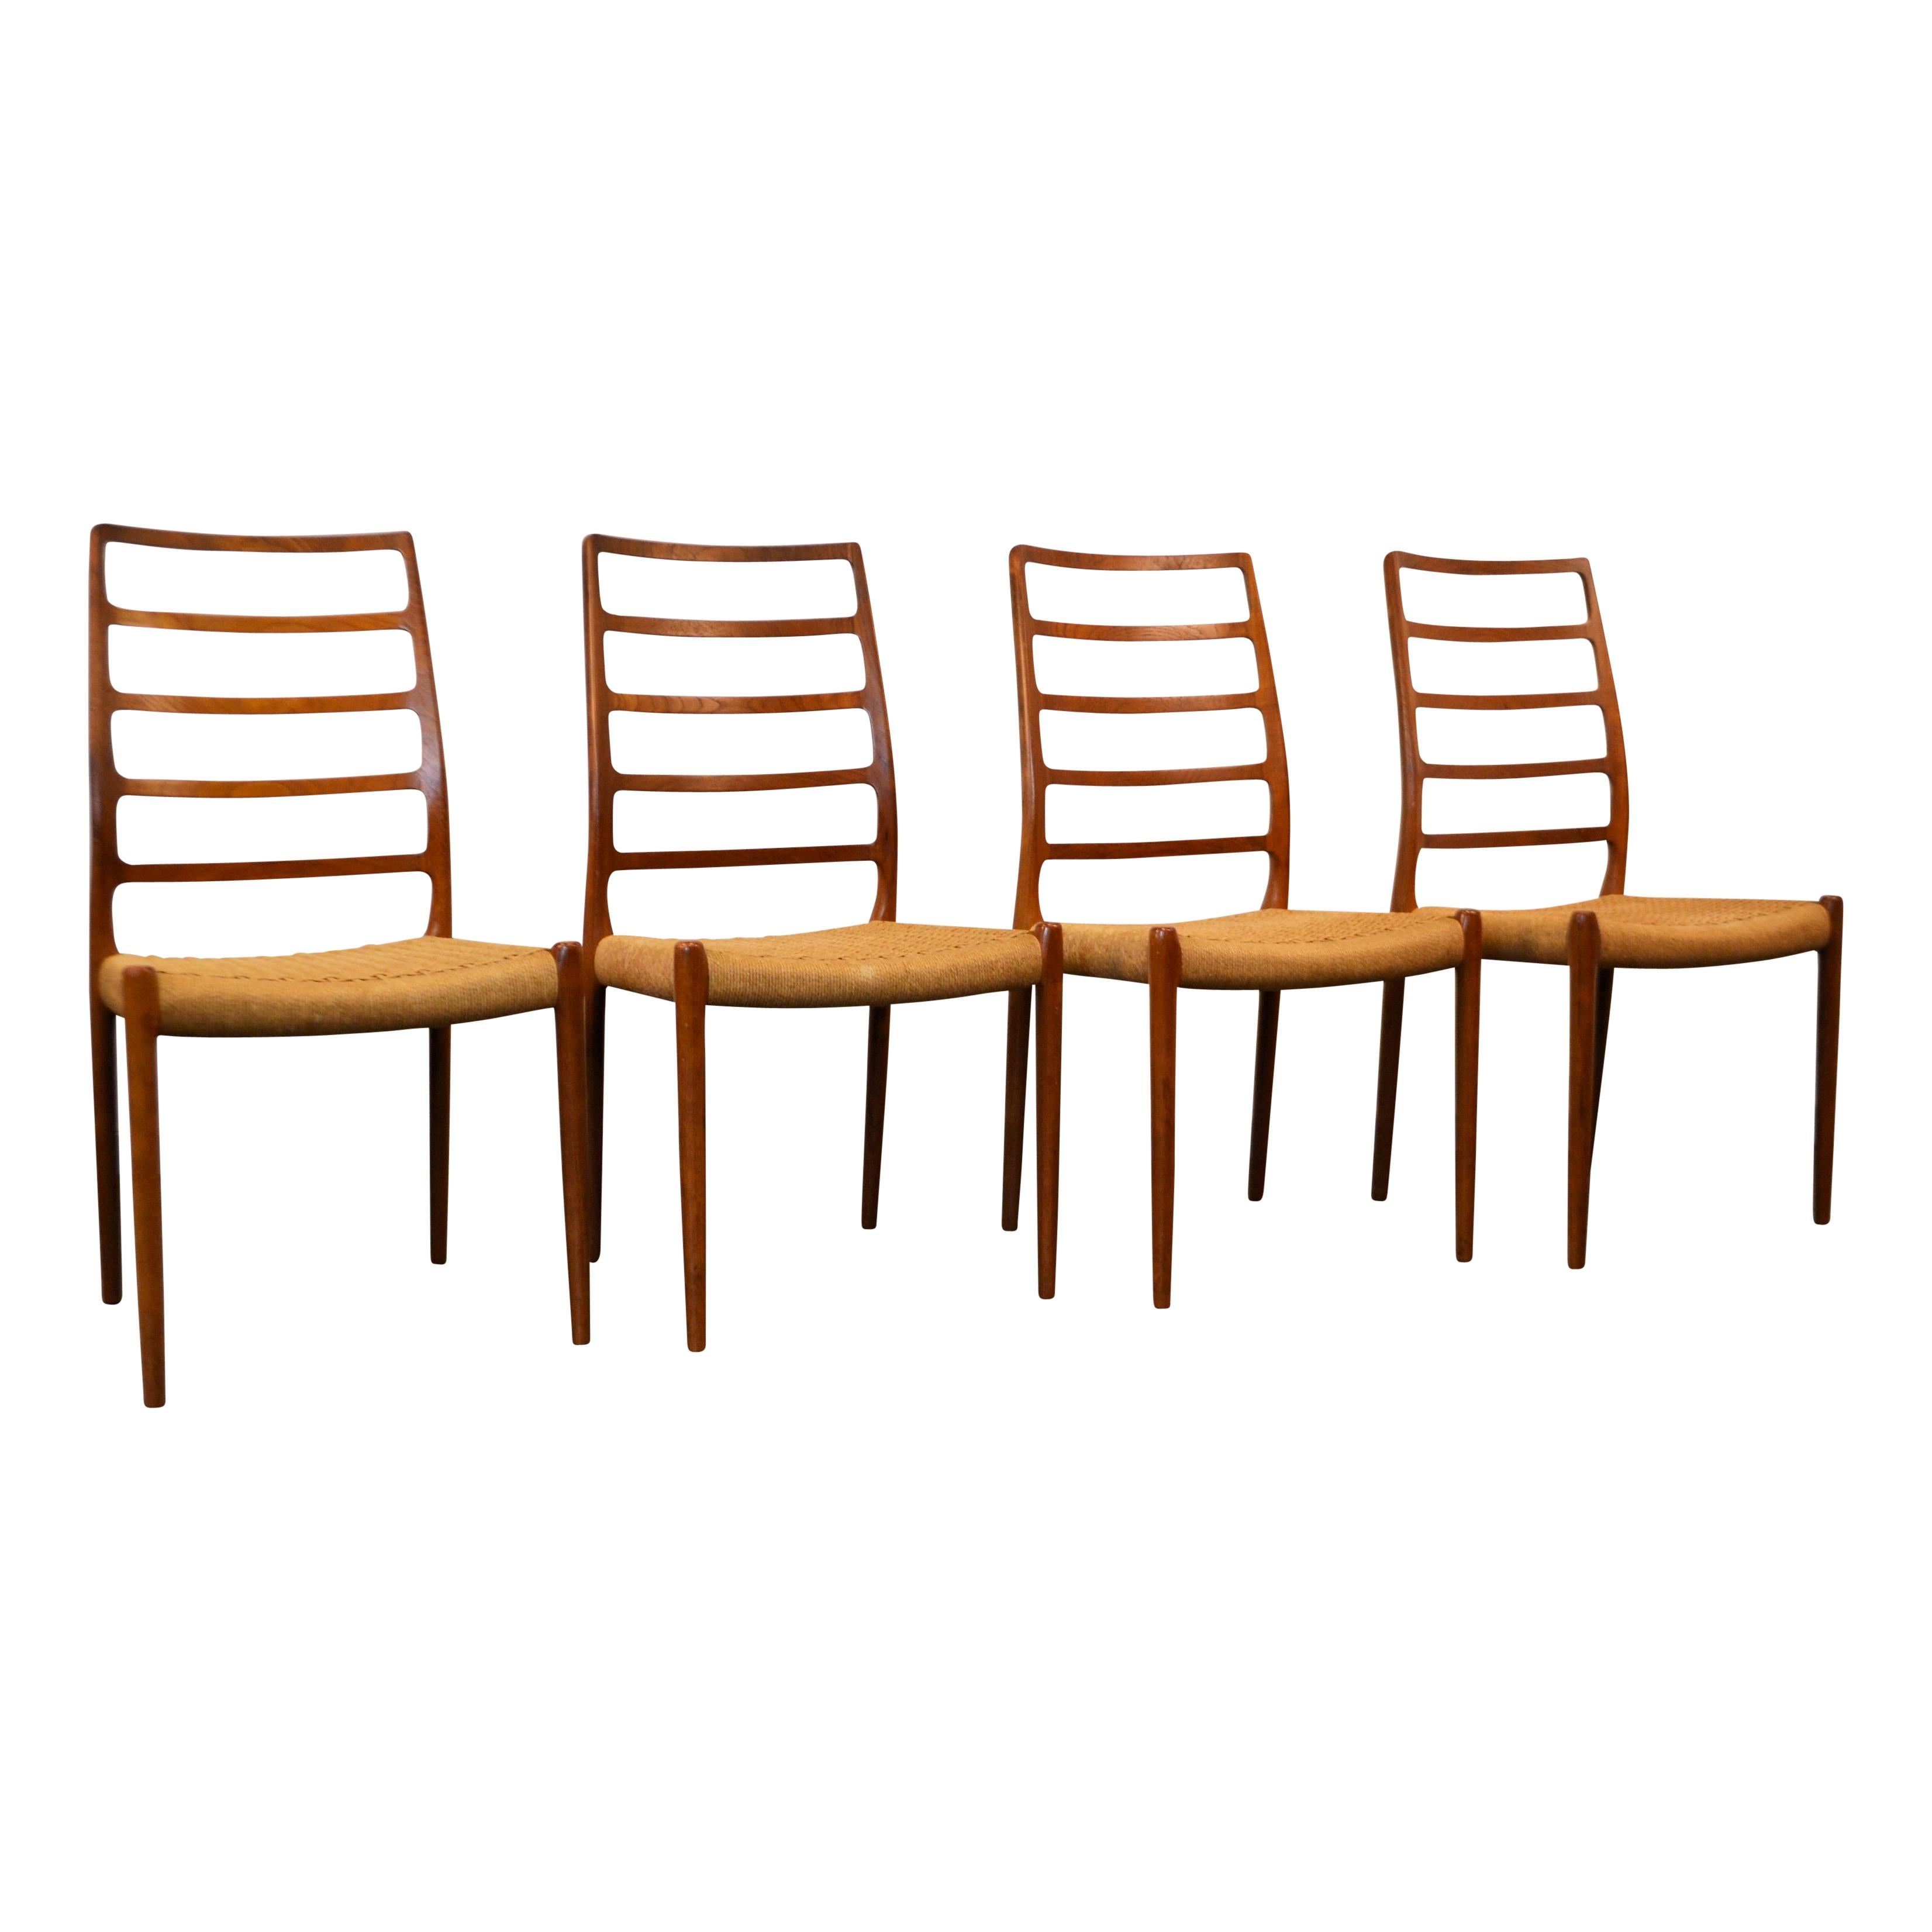 Rare set of four vintage Danish modern model #82 dining chairs designed by Niels O. Møller for J.L. Møller. Model 82 is one of Møller’s rarest and most elegant designs. This stunning Mid-Century Modern design features a gorgeous typical Danish